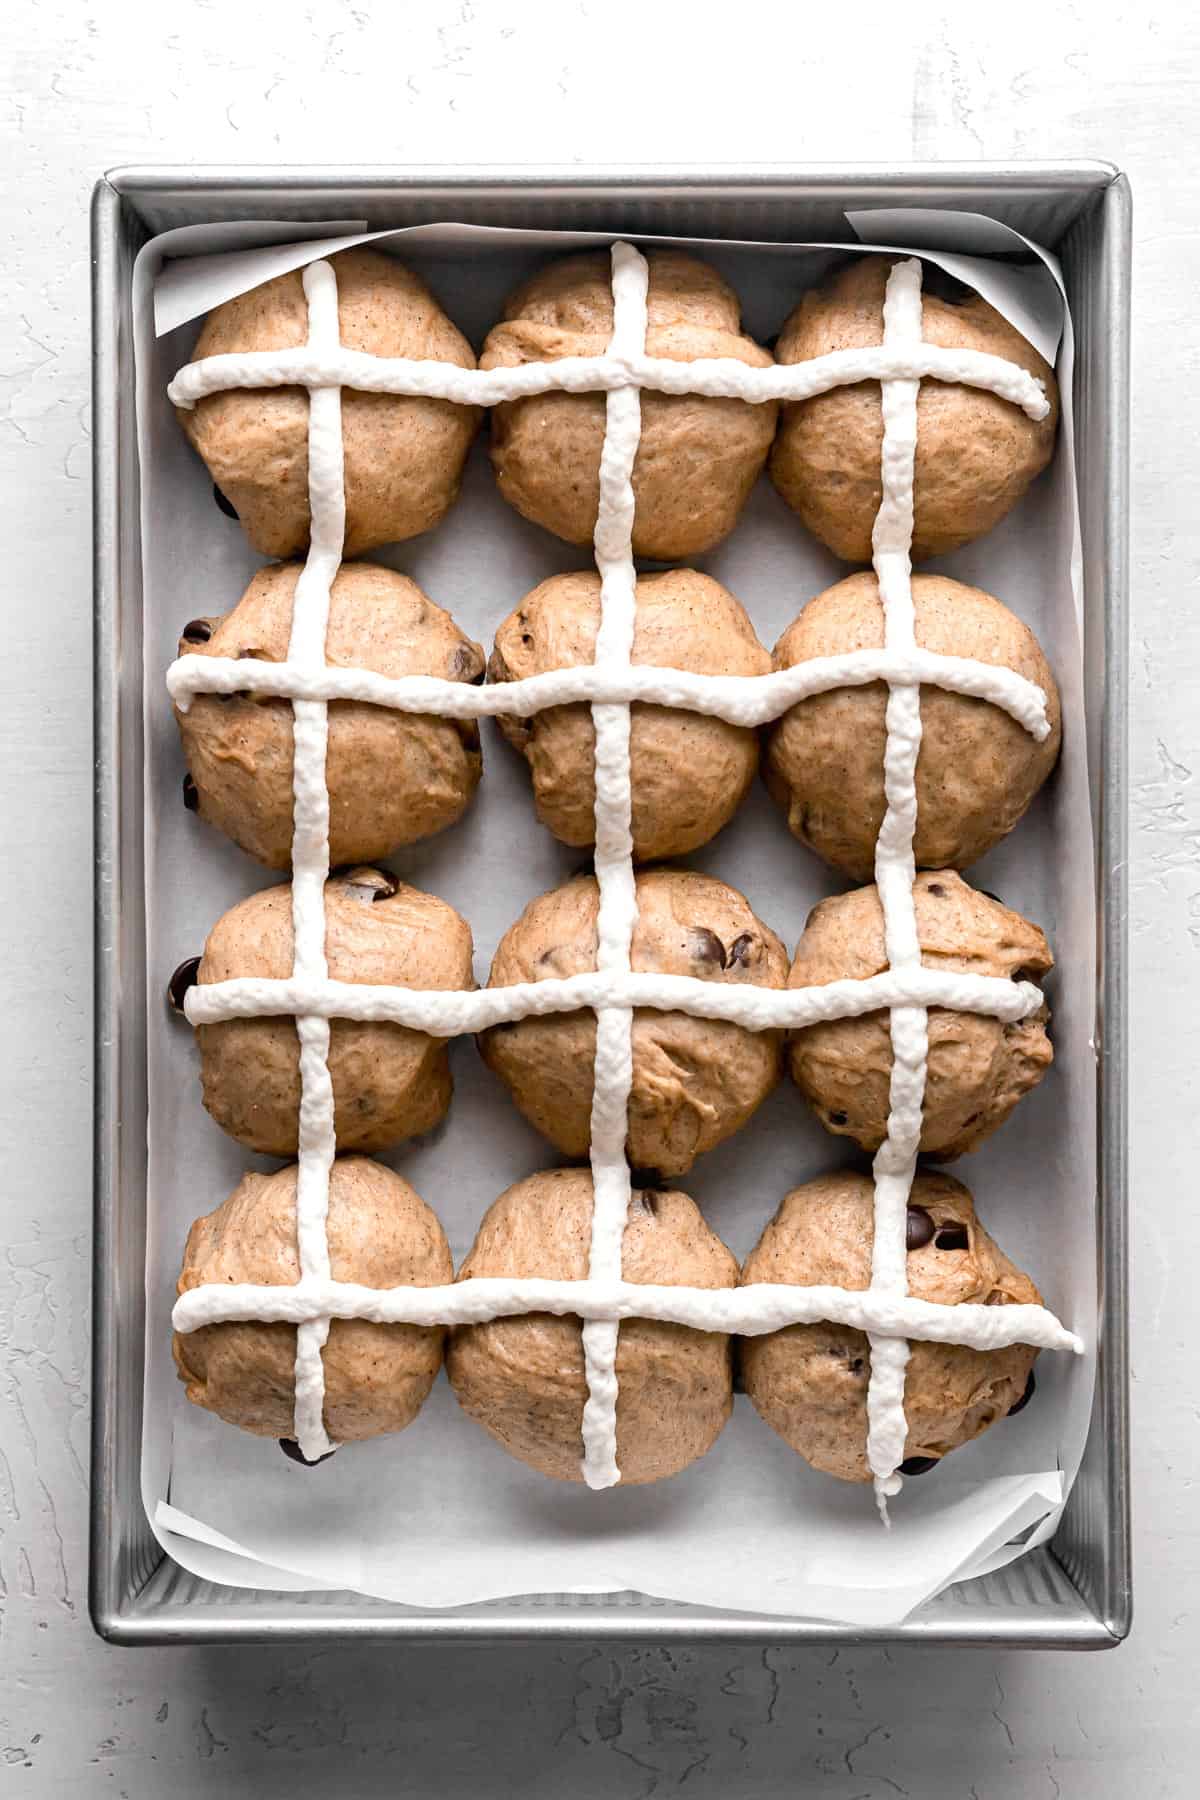 unbaked hot cross buns in 9x13 pan.